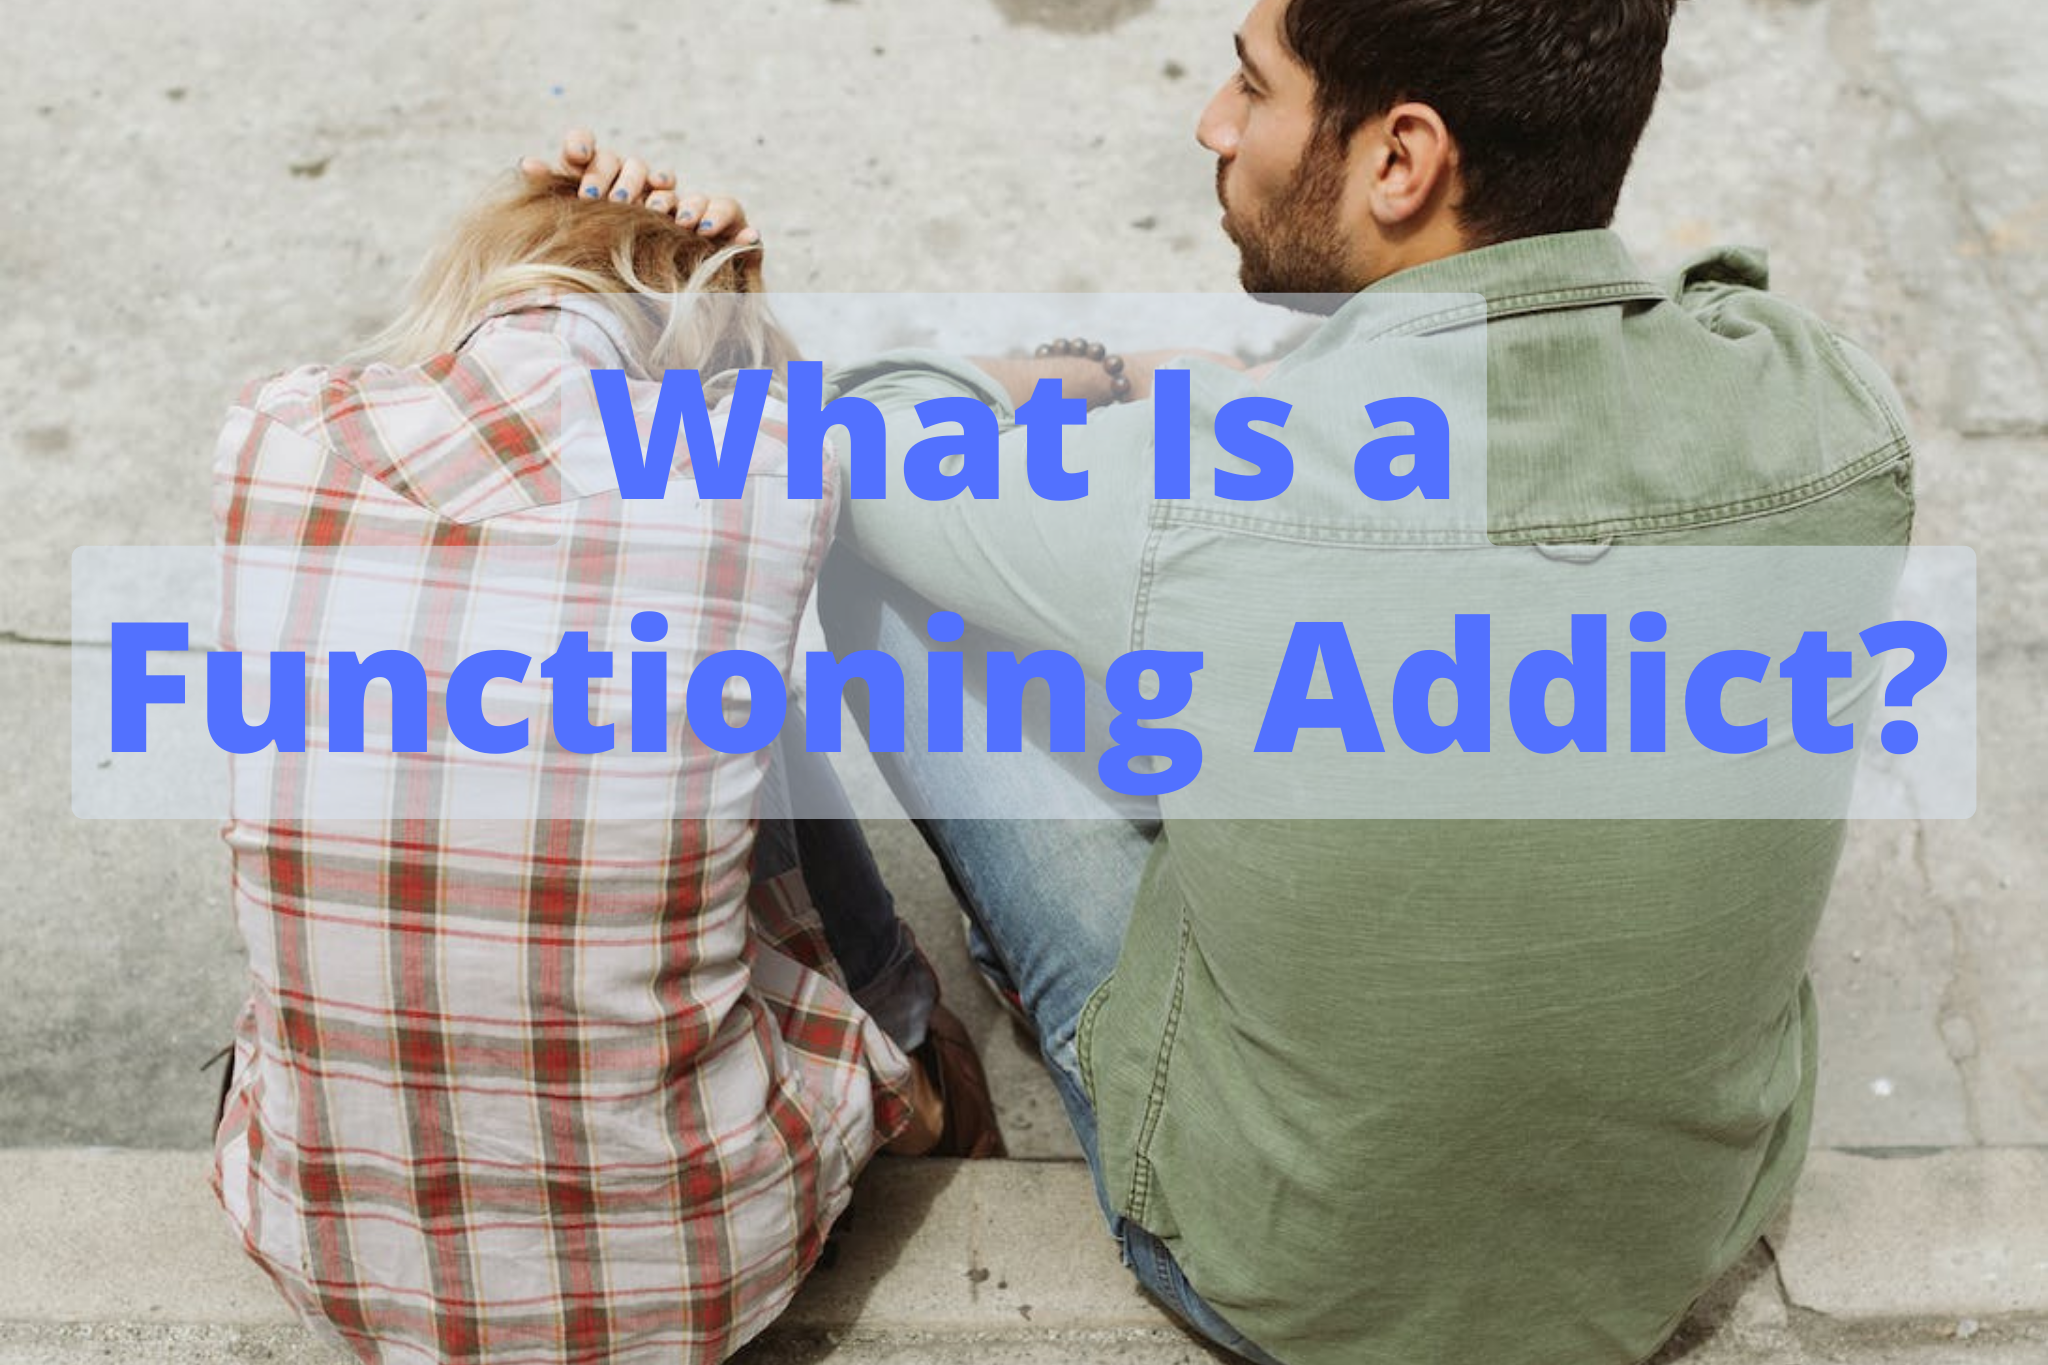 What Is a Functioning Addict?